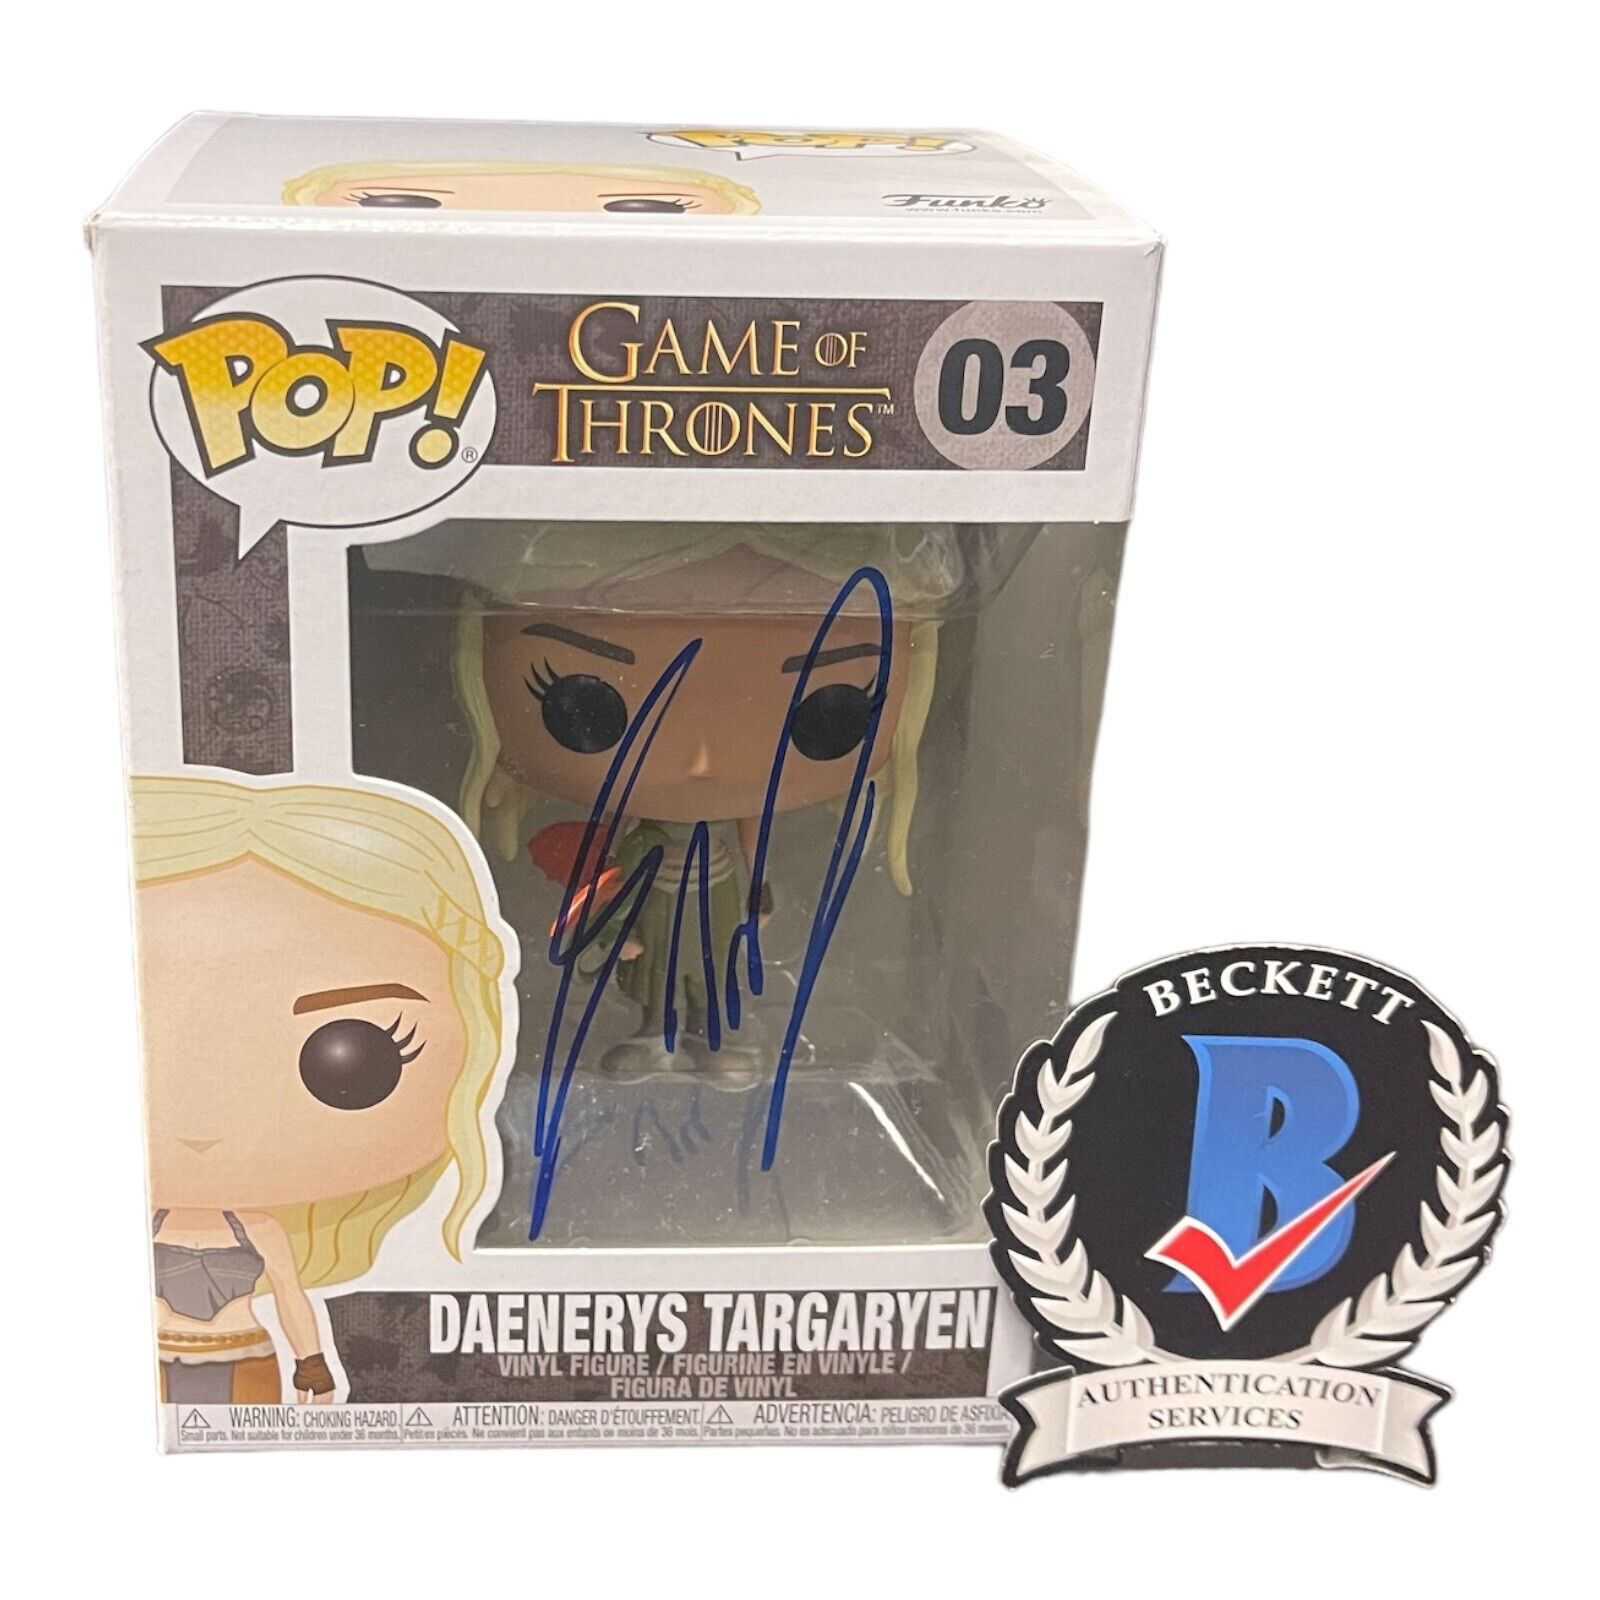 George R R Martin Signed Autograph Game Of Thrones 03 Funko Pop Beckett BAS